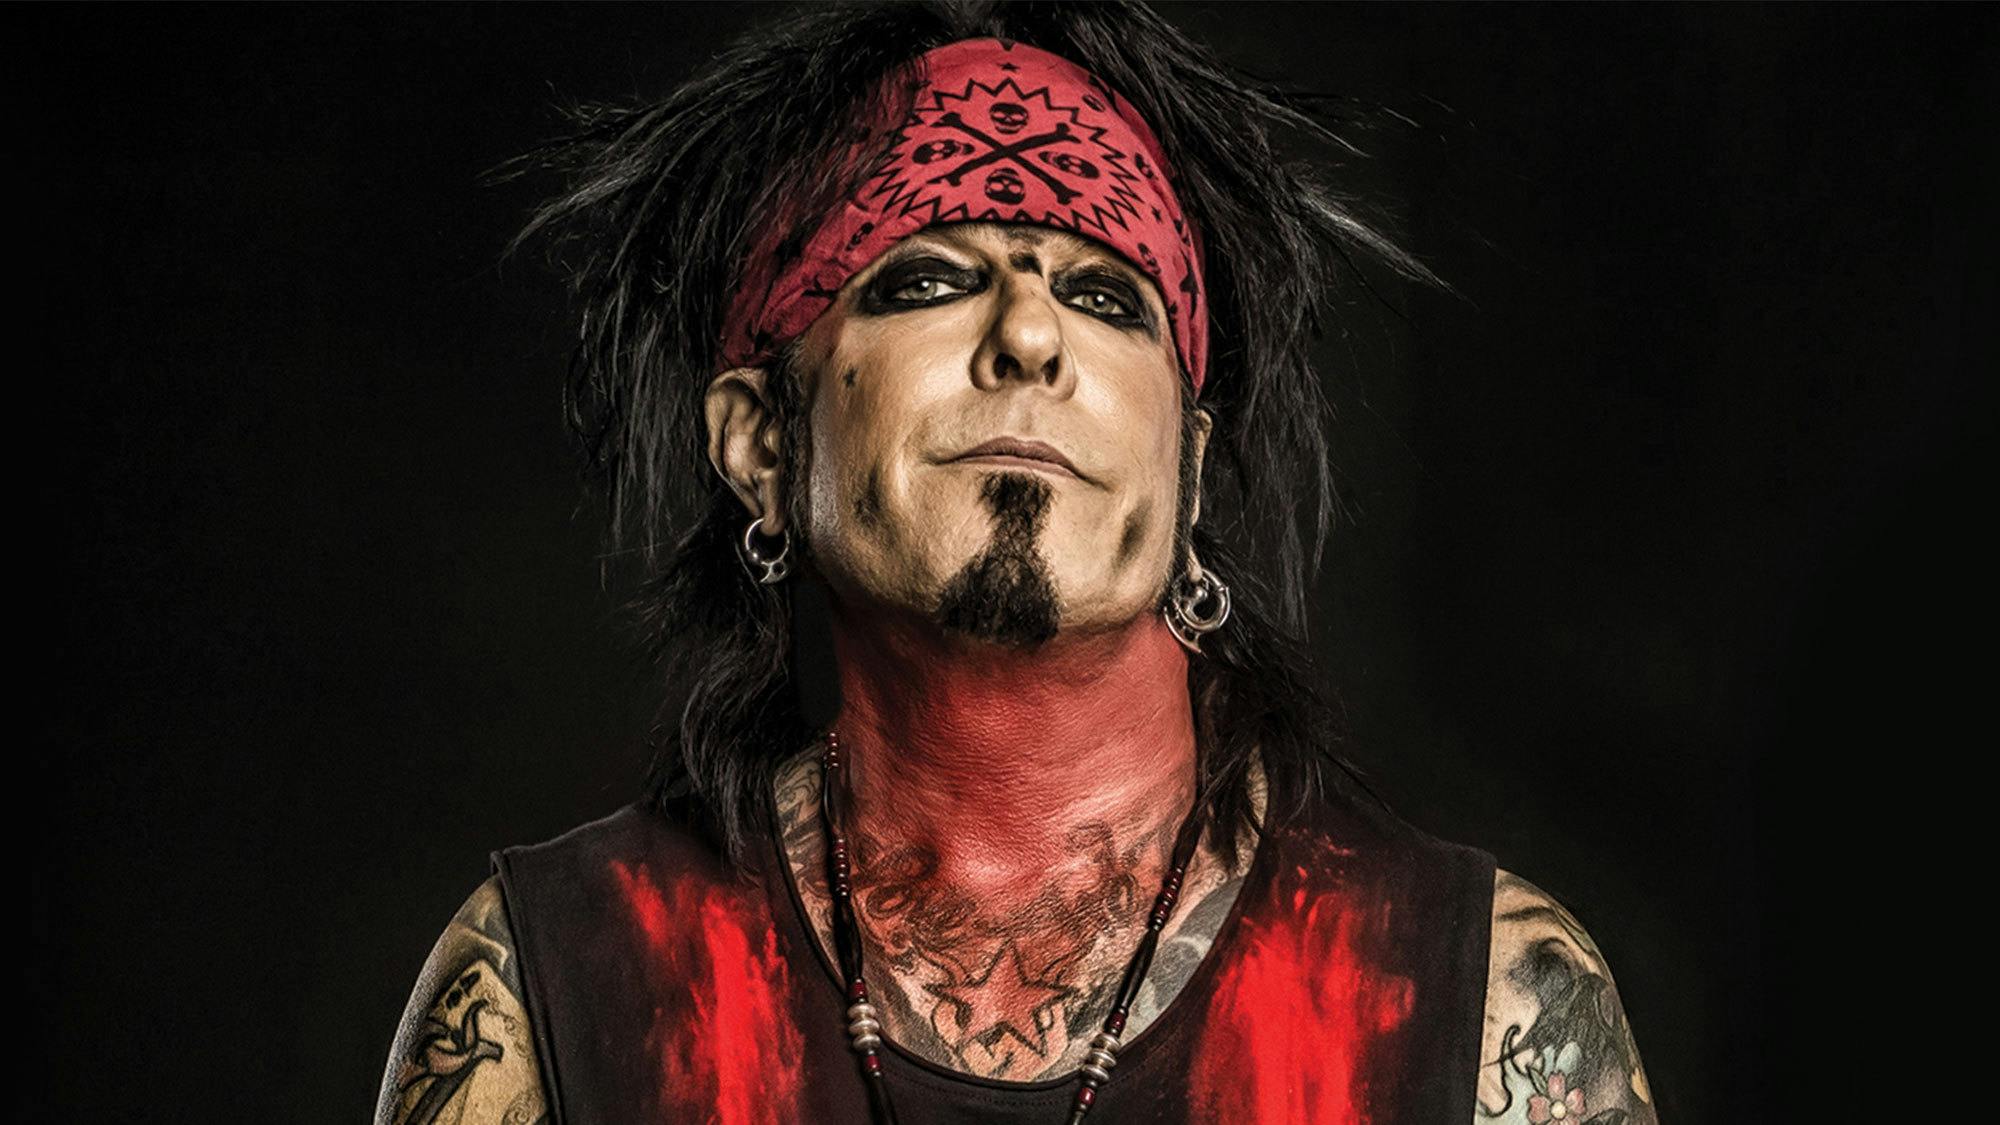 Nikki Sixx: "KISS Used Our Schtick… It's Uncool"